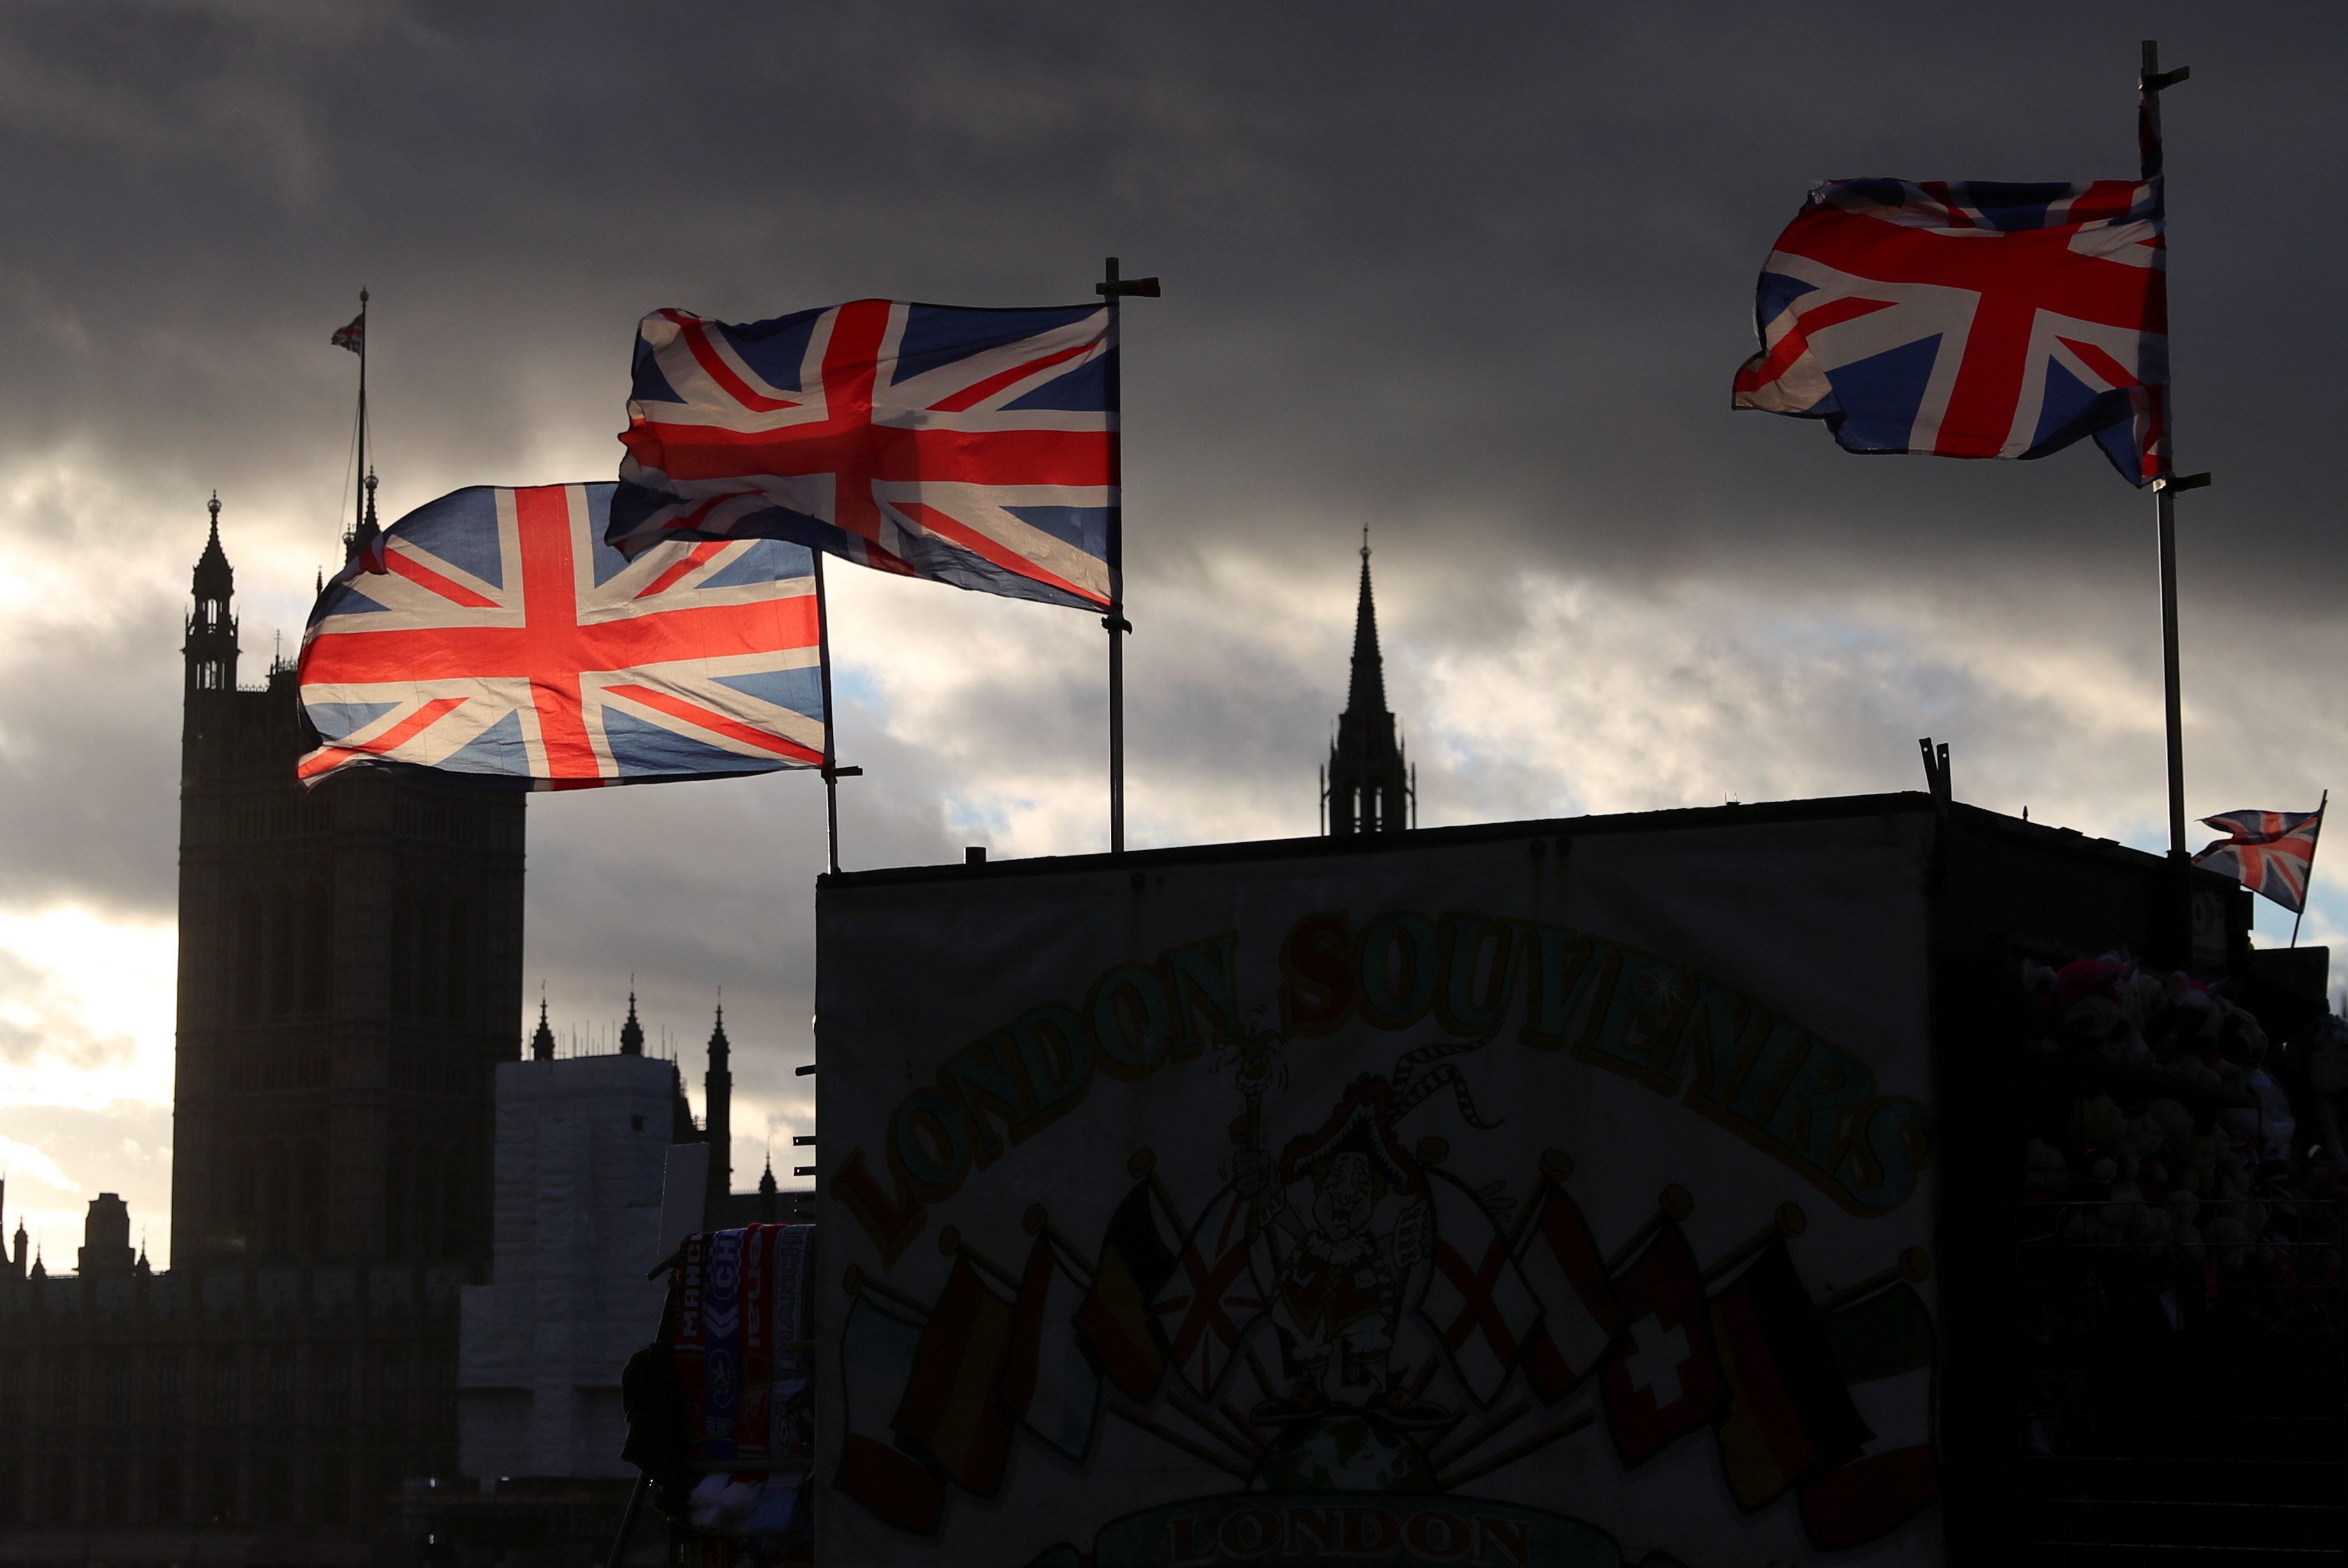 Union Jack flags fly in the wind in front of the Parliament at Westminster bridge, in London